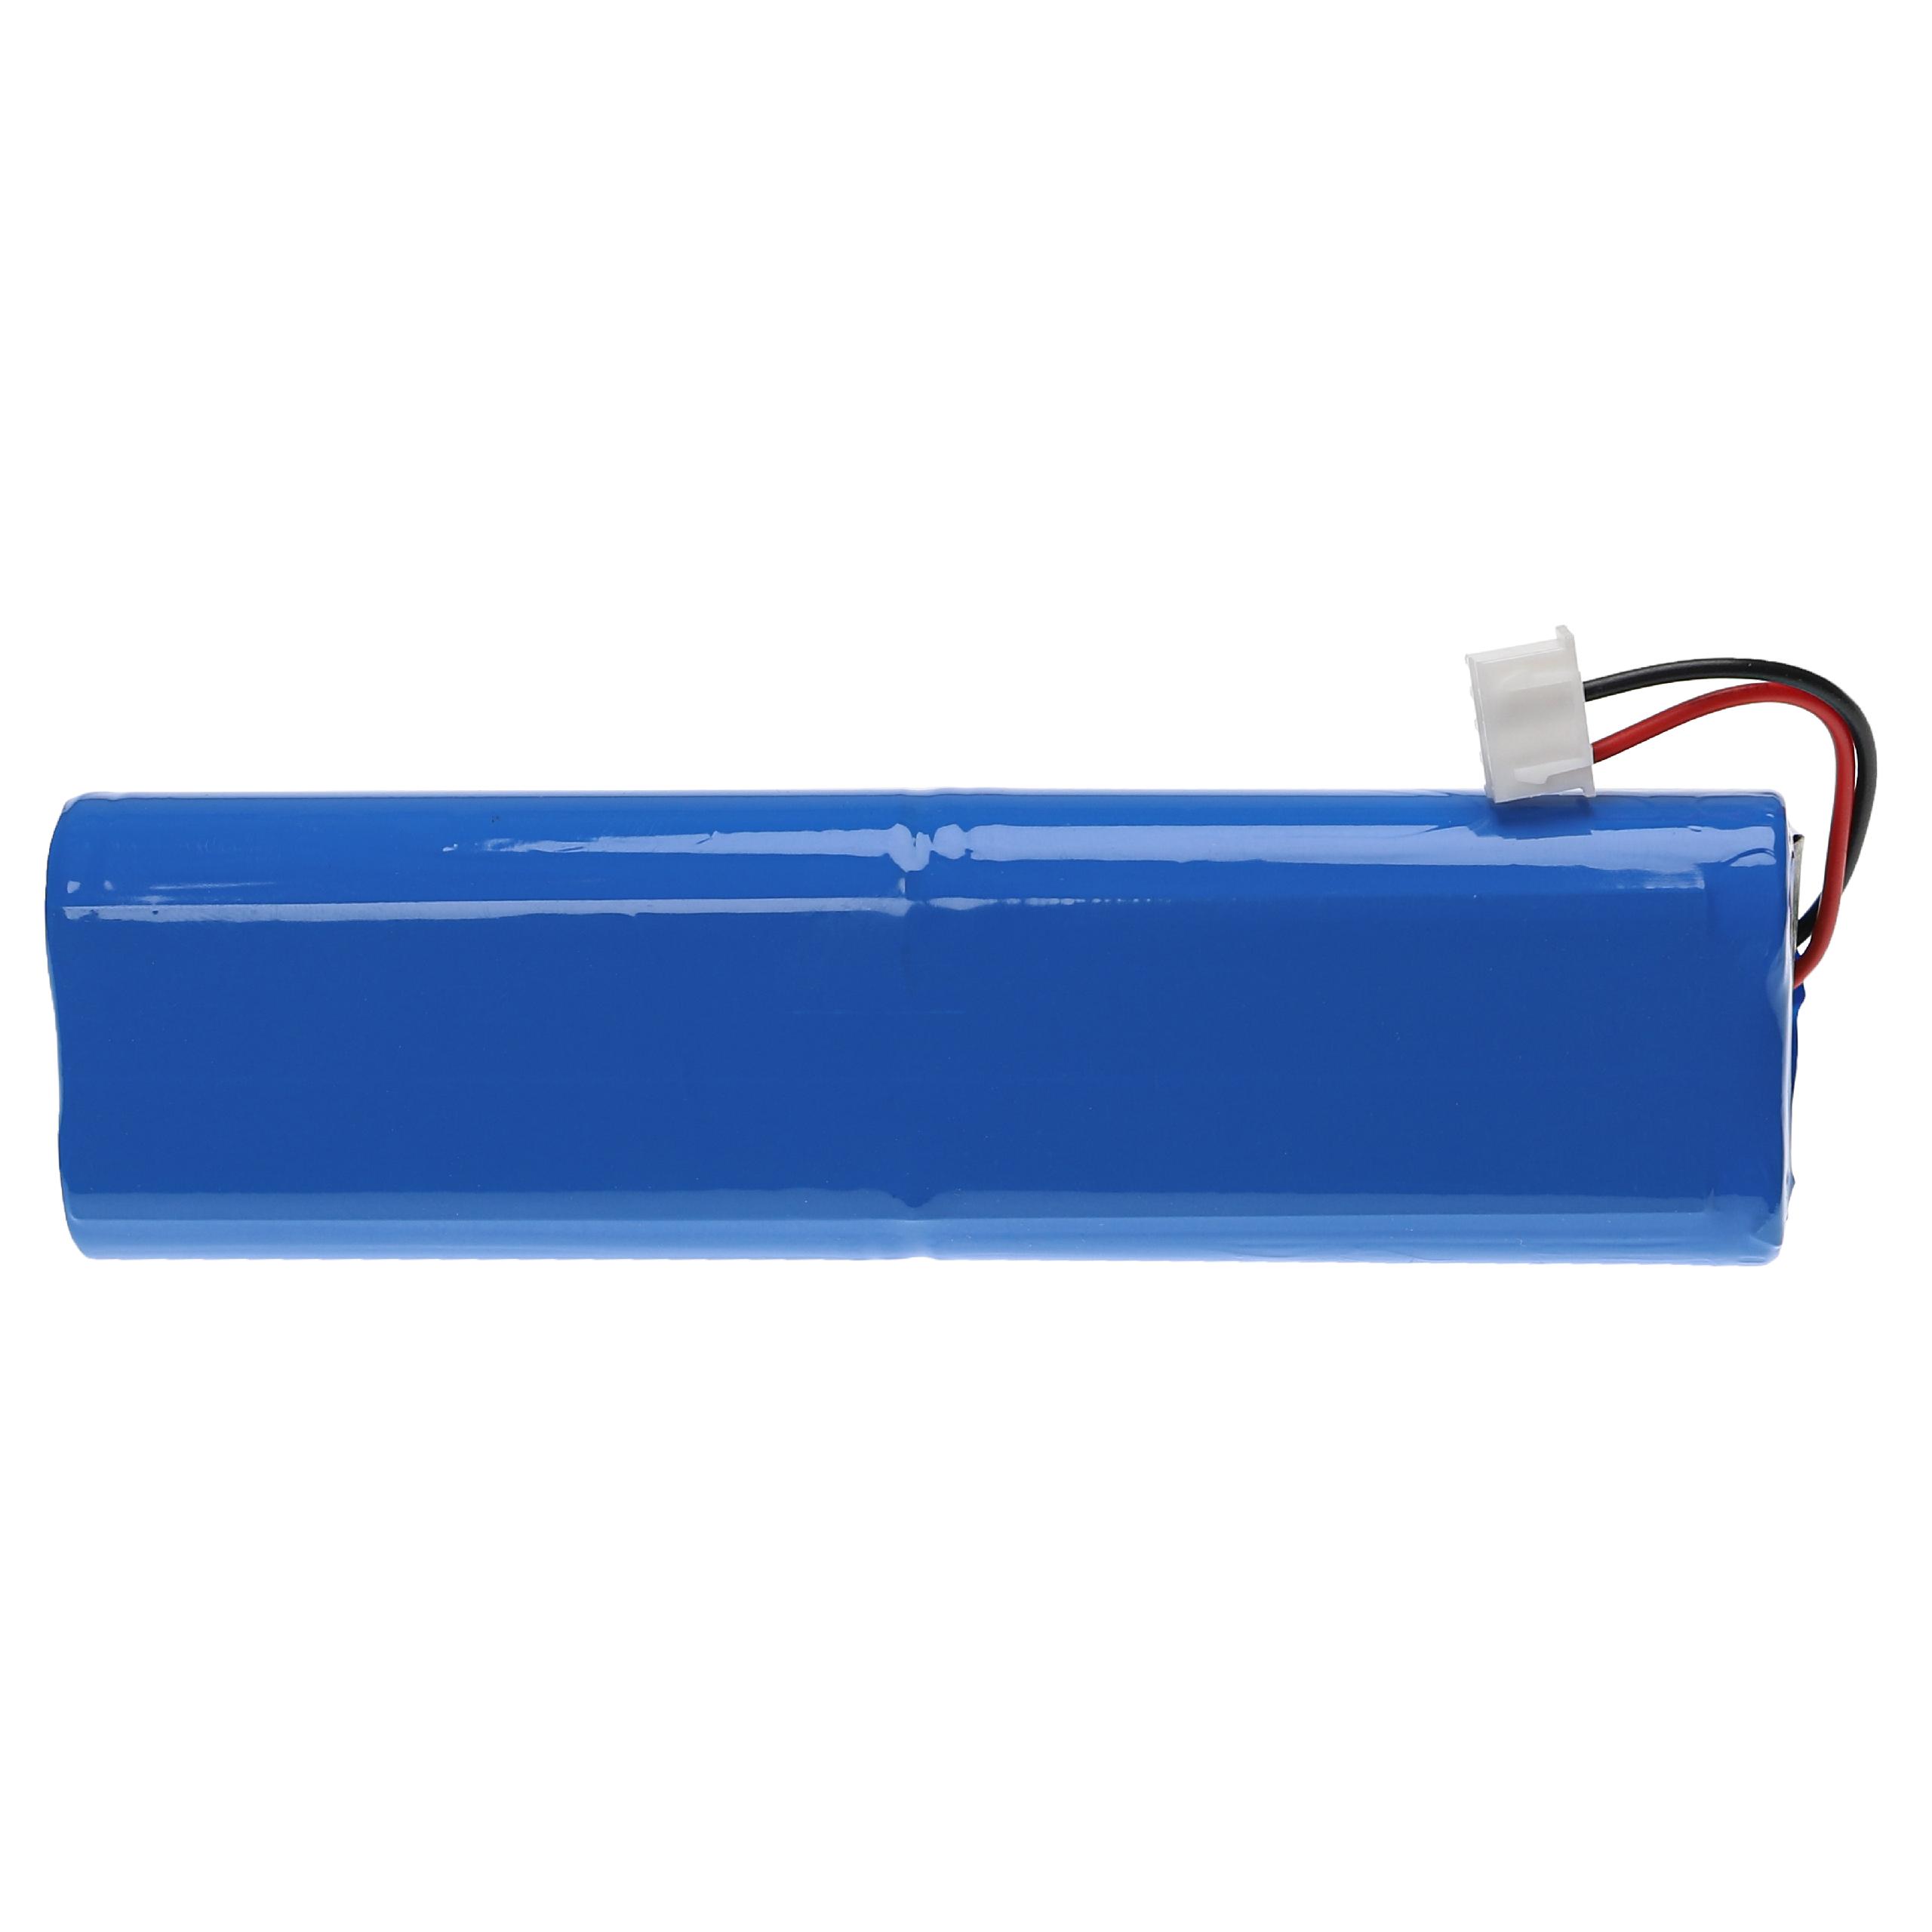 Battery Replacement for Ecovacs S08-LI-144-2500 for - 3400mAh, 14.4V, Li-Ion